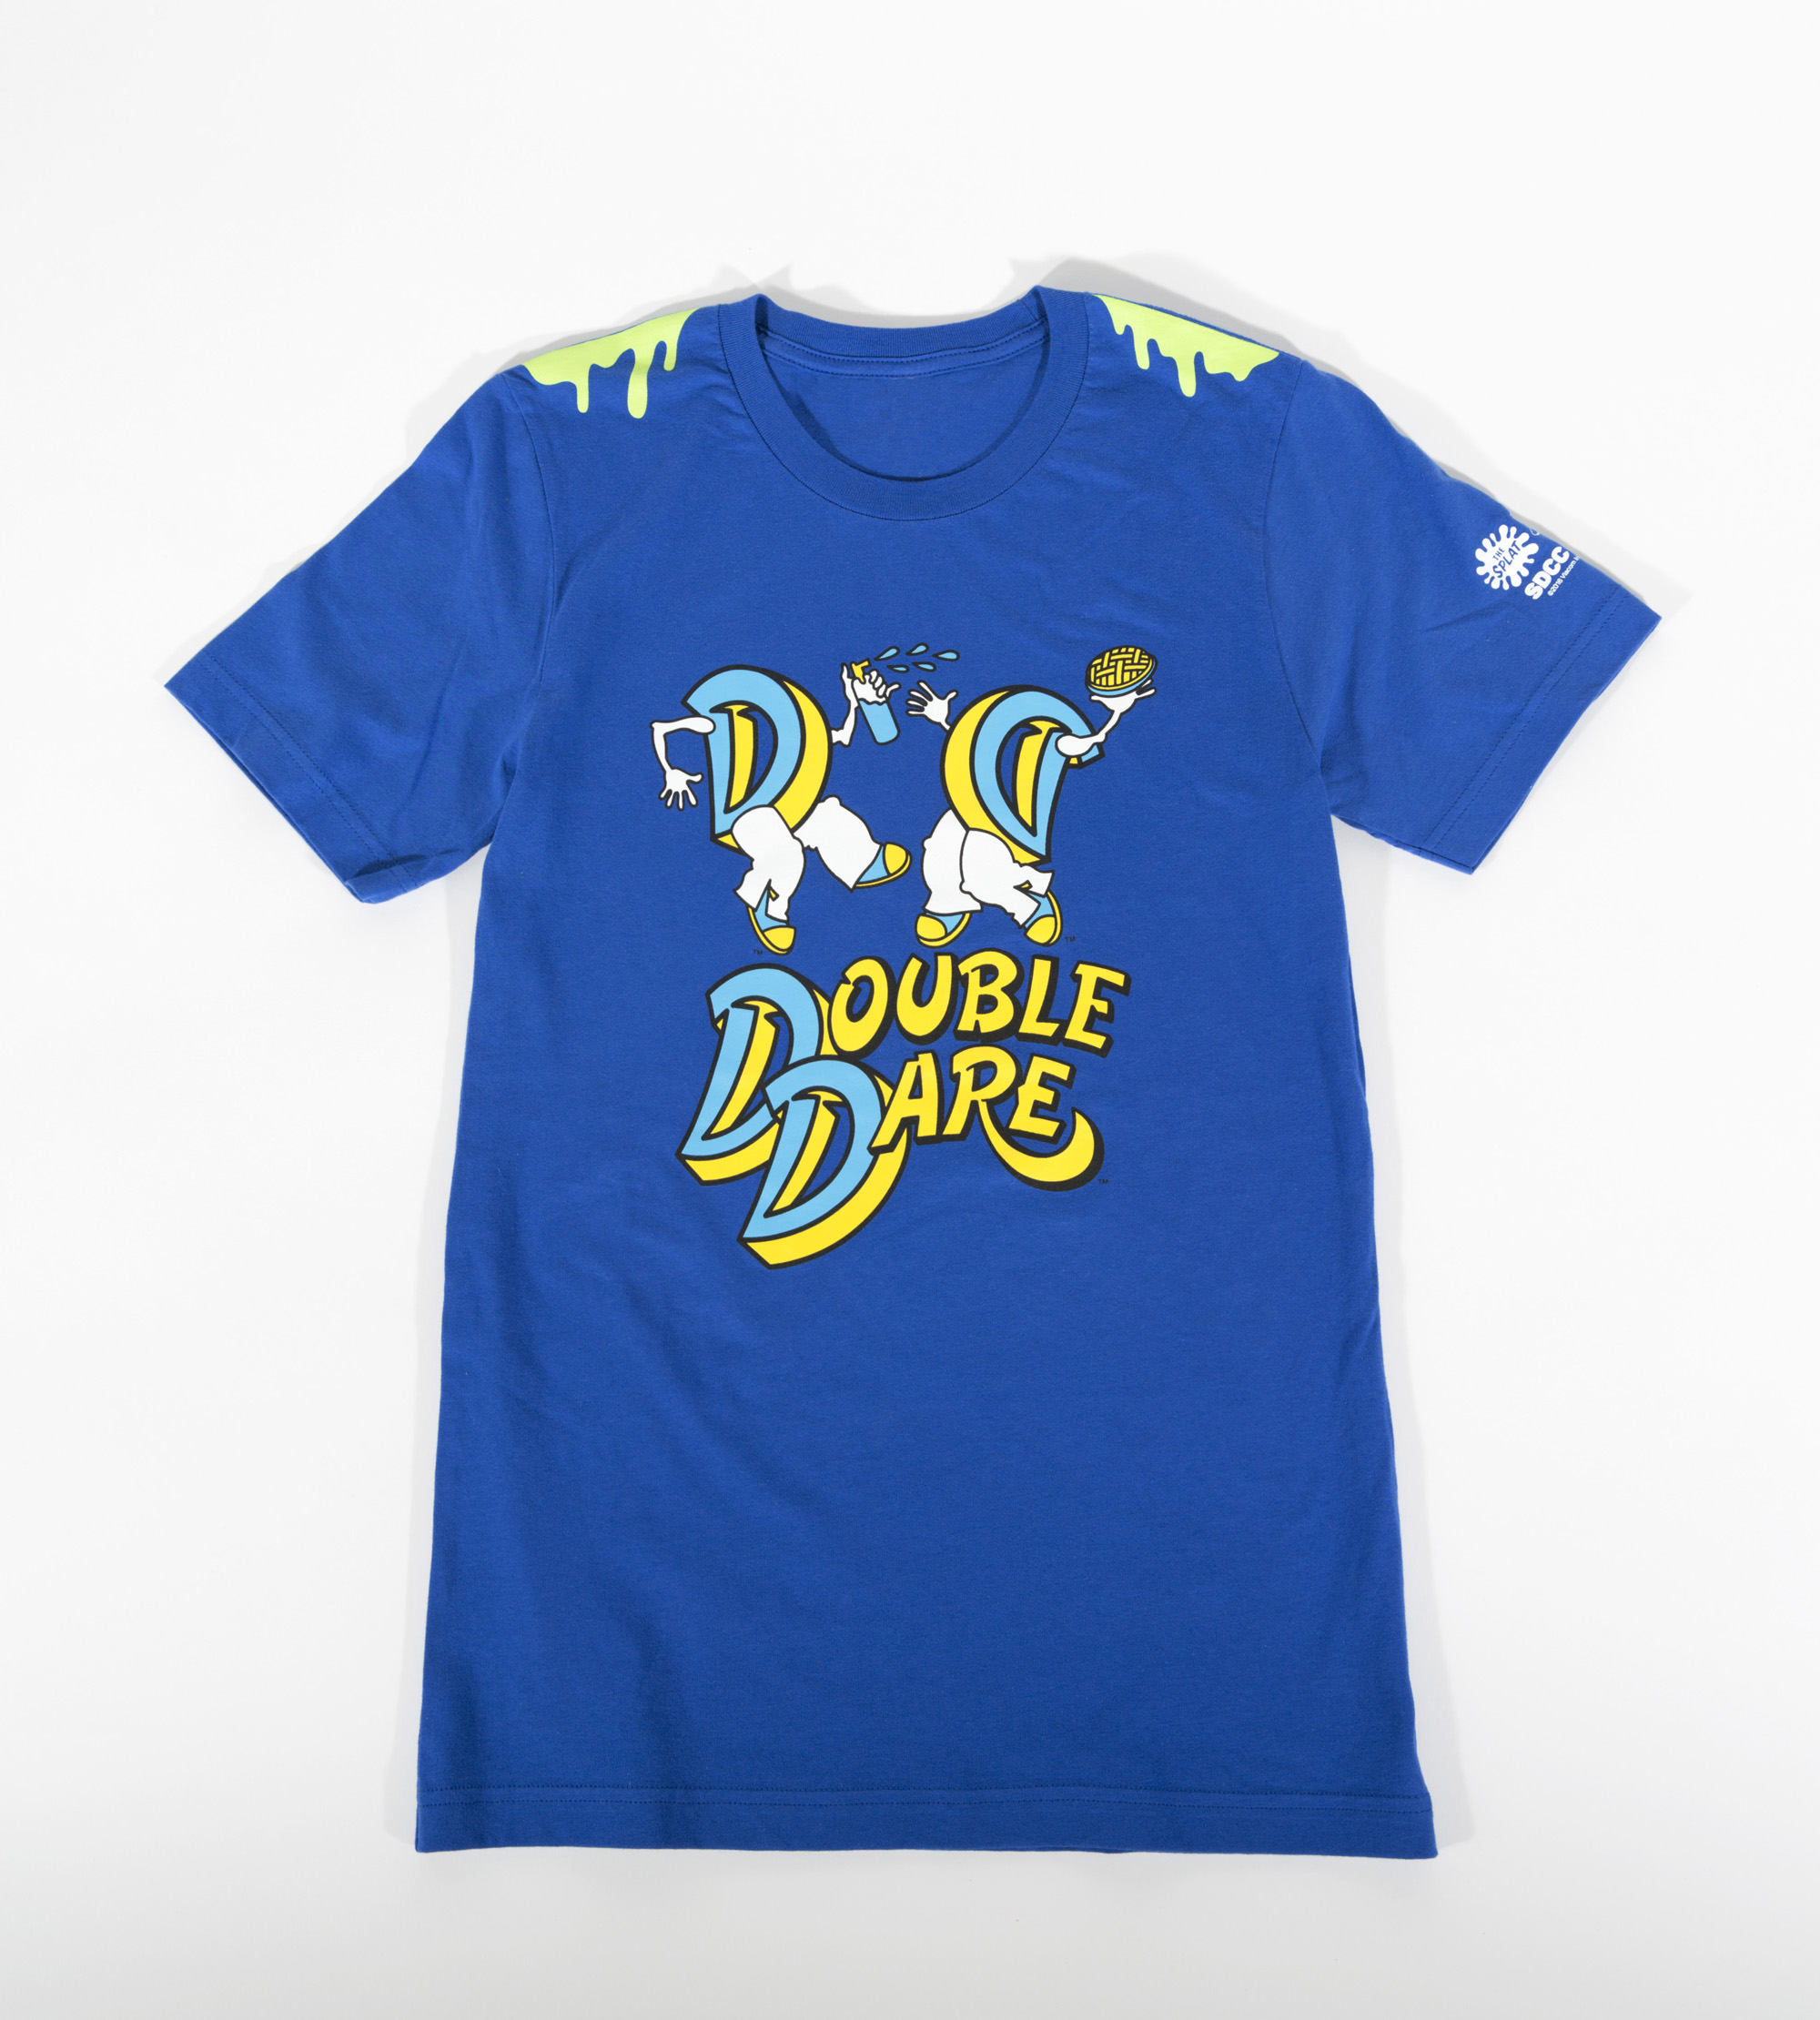 SDCC 2016_Nick_Double Dare Tshirt